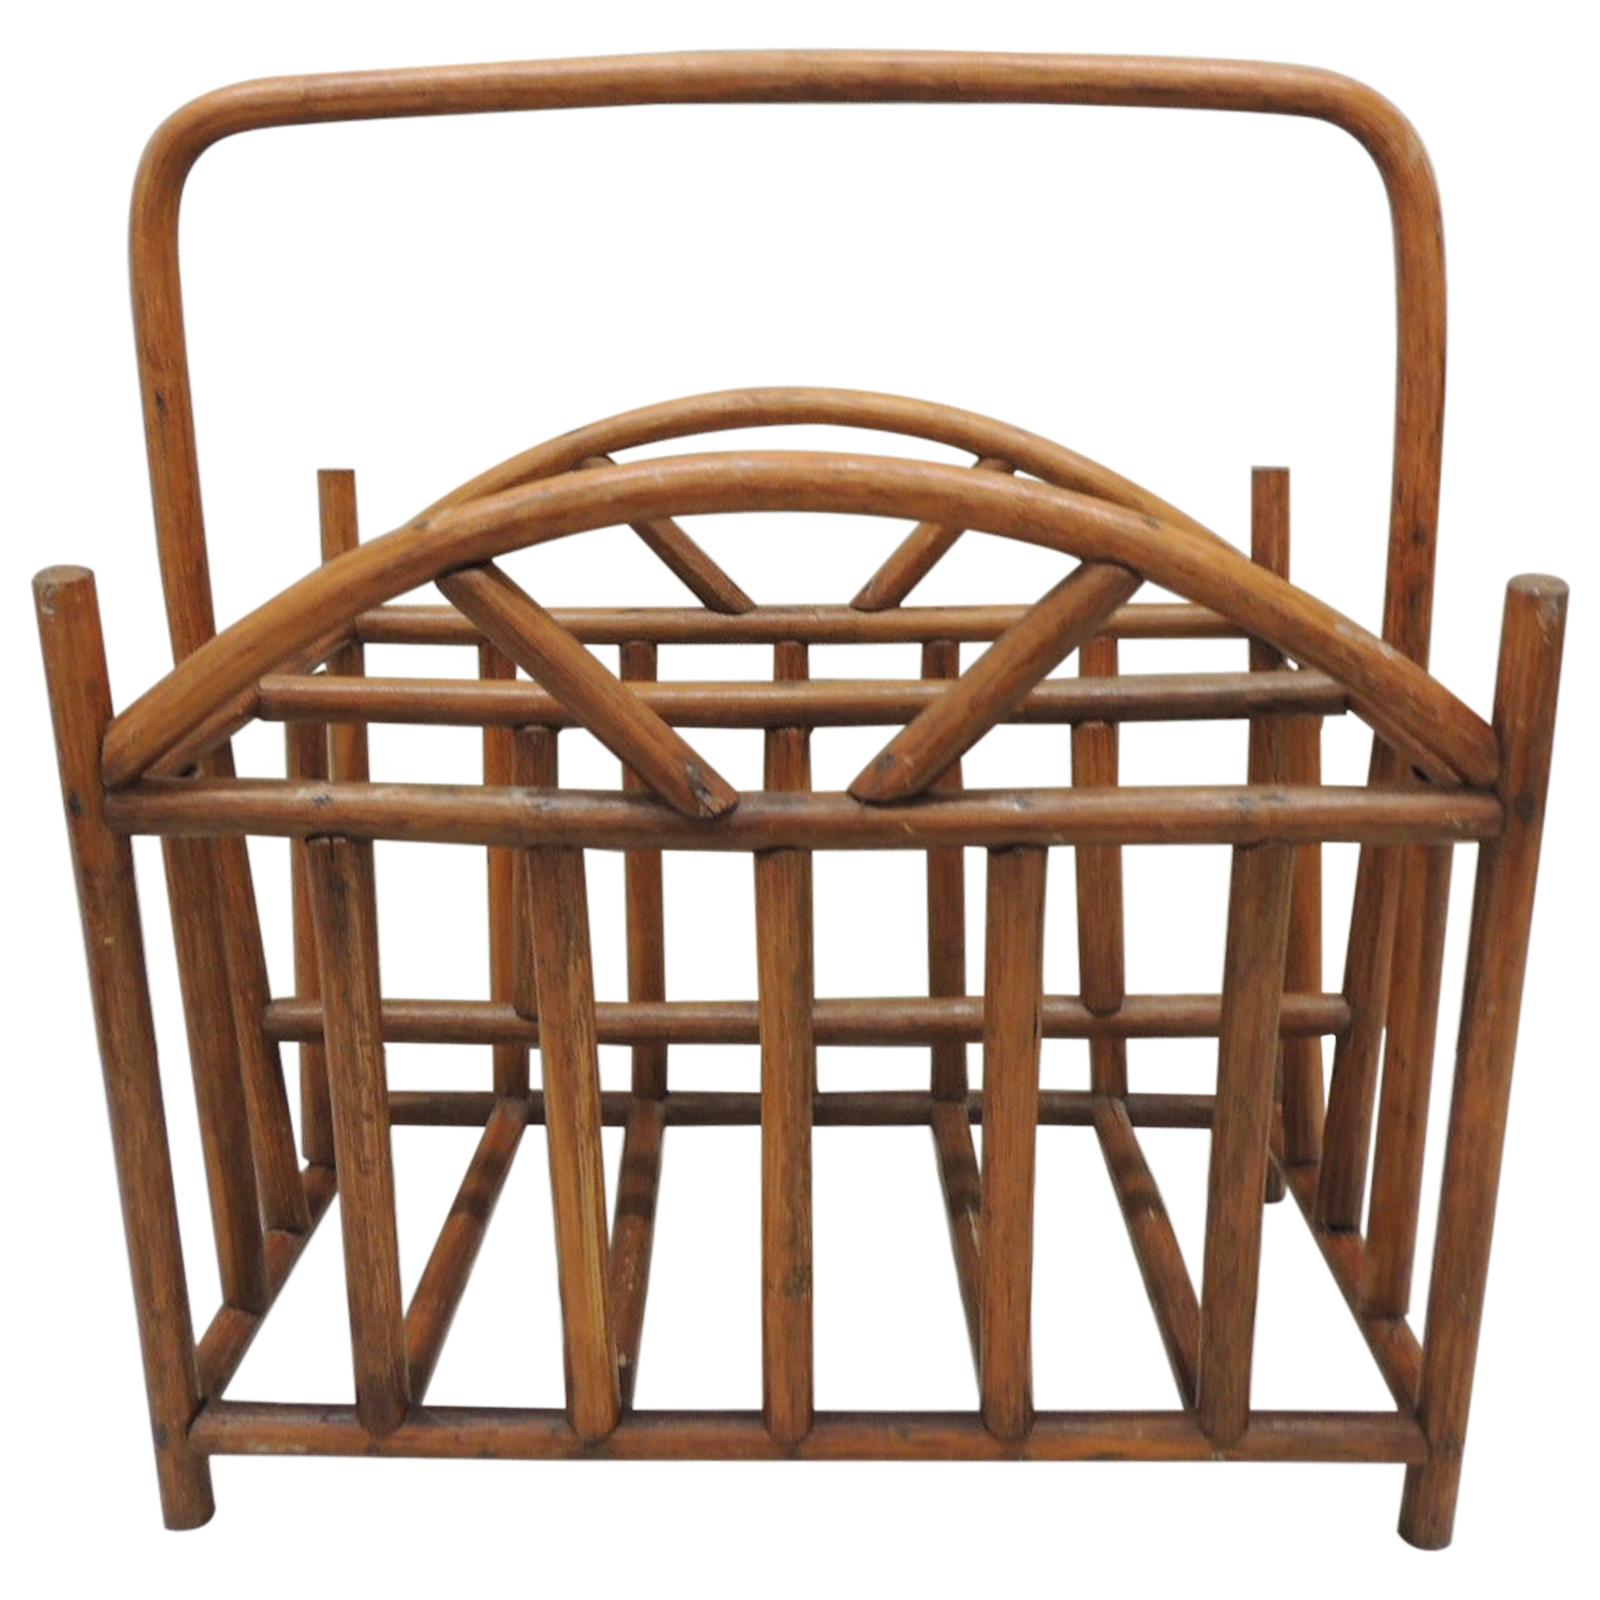 Vintage Bent  Bamboo Magazine Rack or Stand